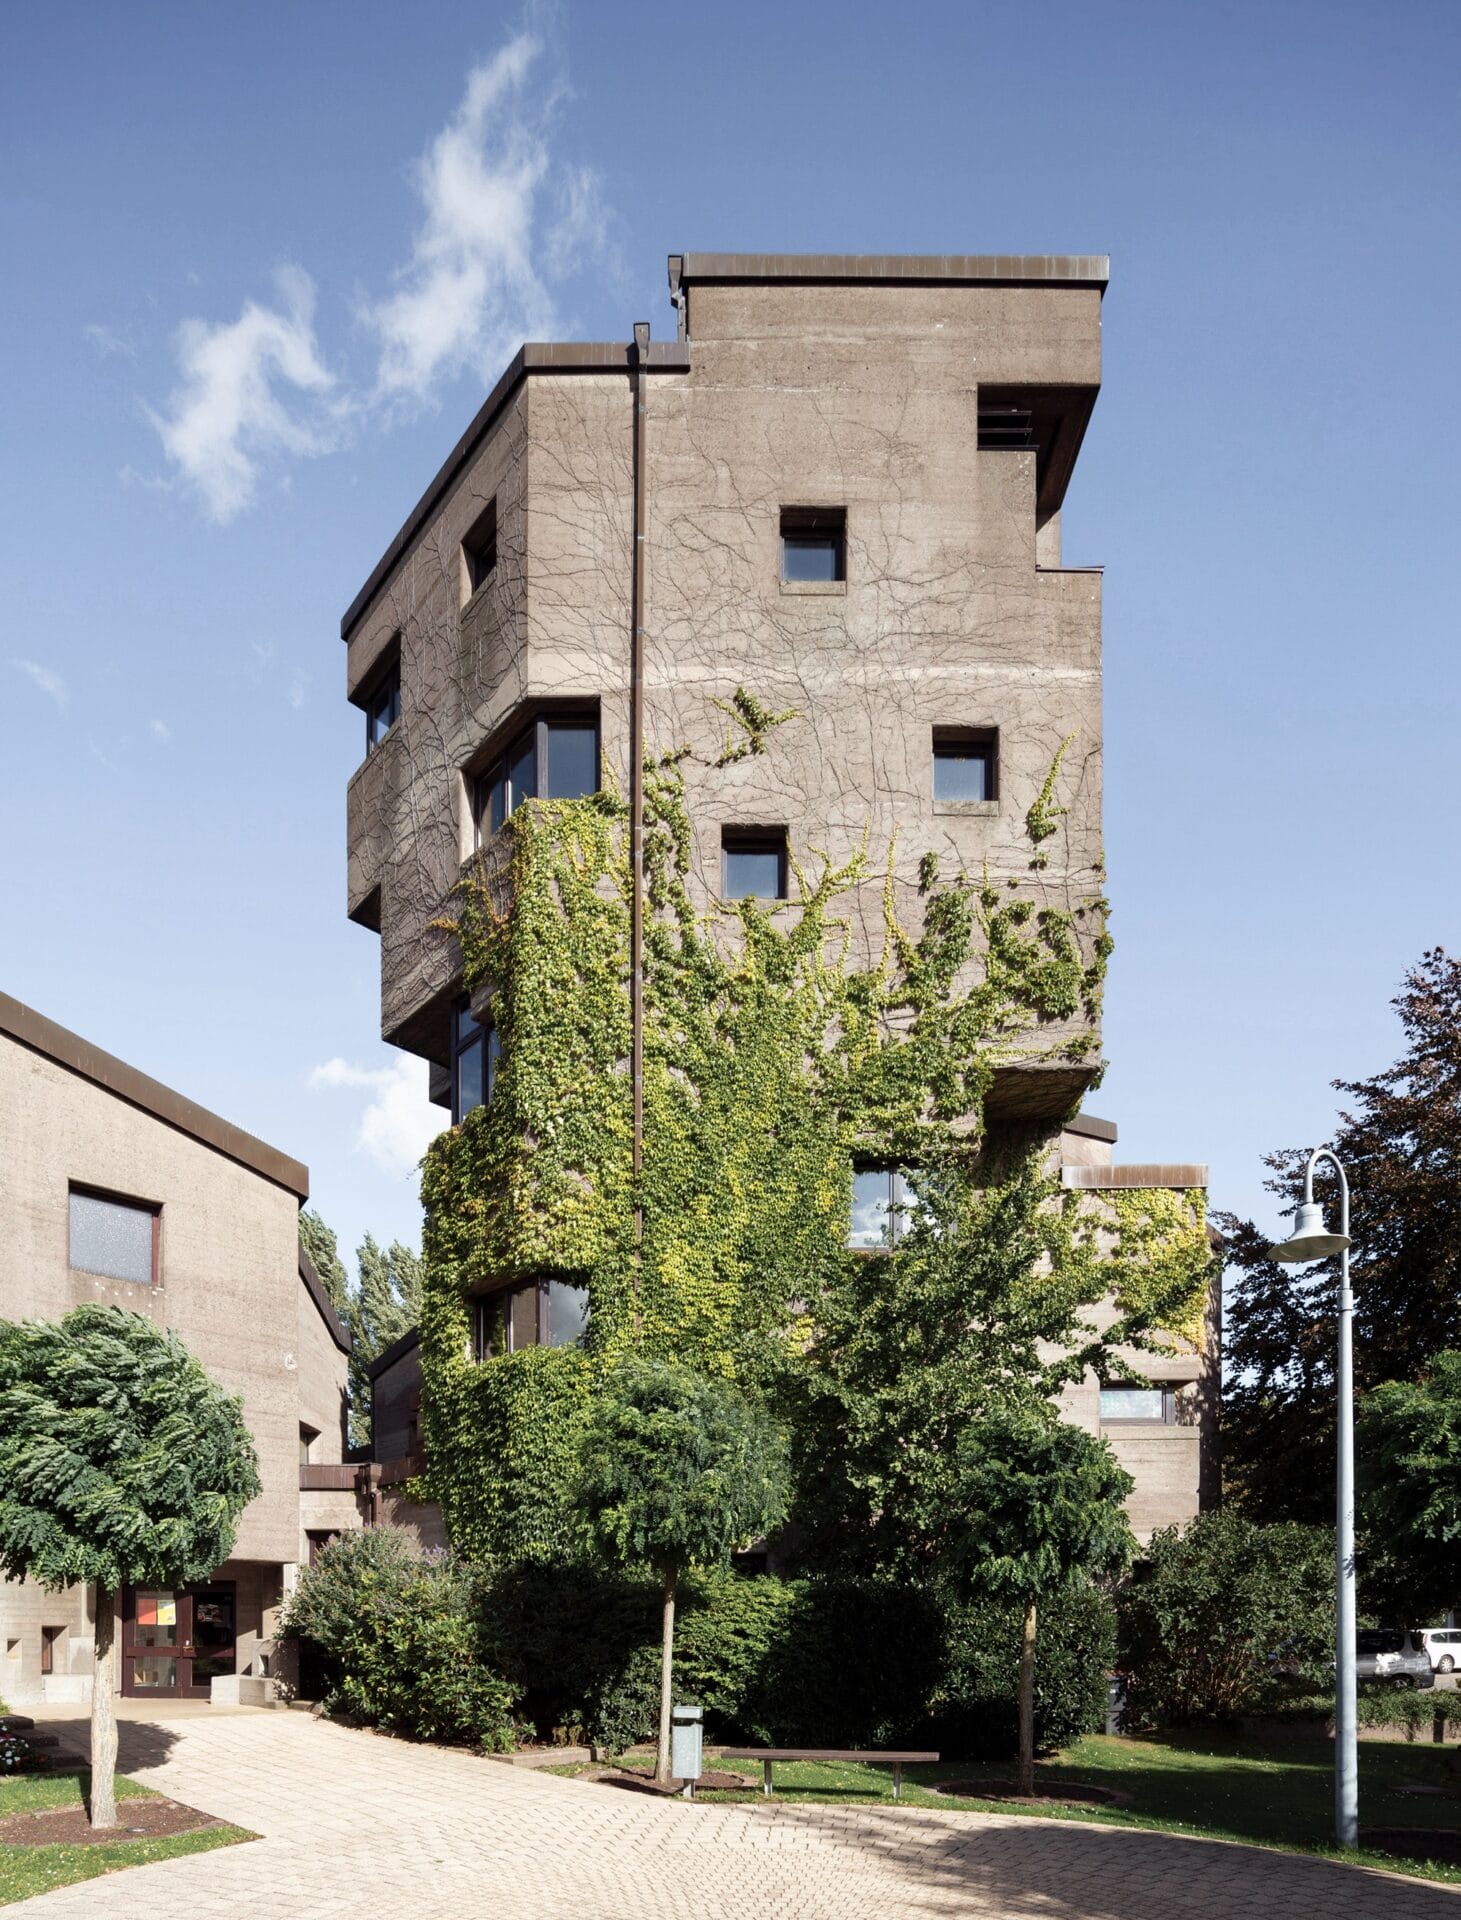 the exterior of a brutalist tower with vines creeping up the wall and trees around the base